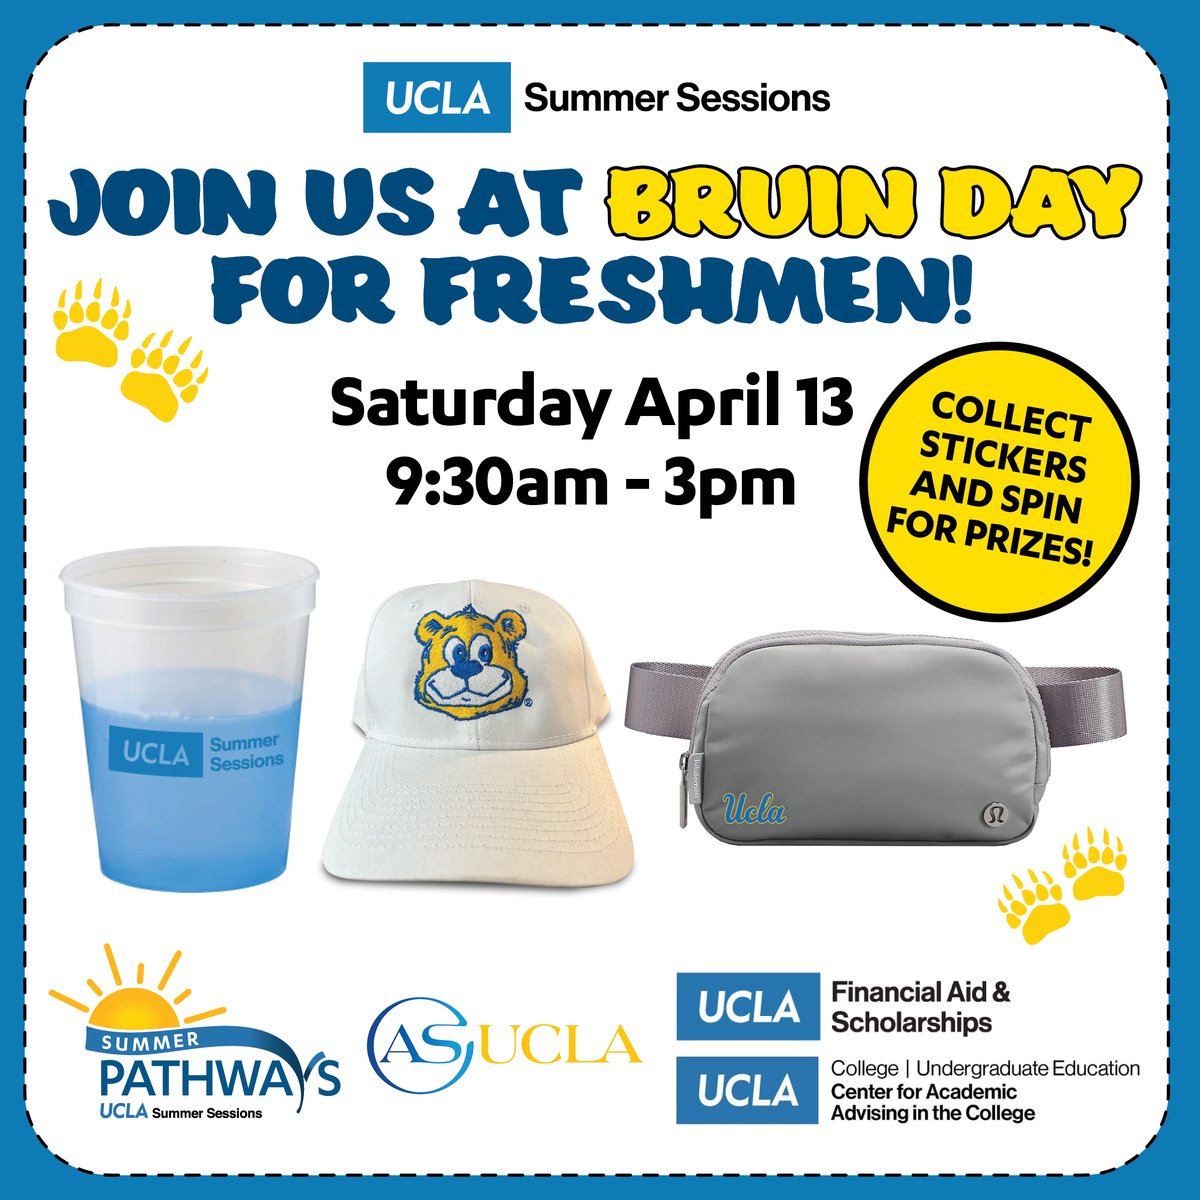 Congrats class of 2028! Learn more about UCLA at Bruin Day for Freshmen Admits on Saturday, April 13. Collect stickers at the Summer Pathways, ASUCLA, Financial Aid, and CAAC booths and spin for a prize at the Summer Sessions booth! See you all there! bruinday.ucla.edu/freshmen/